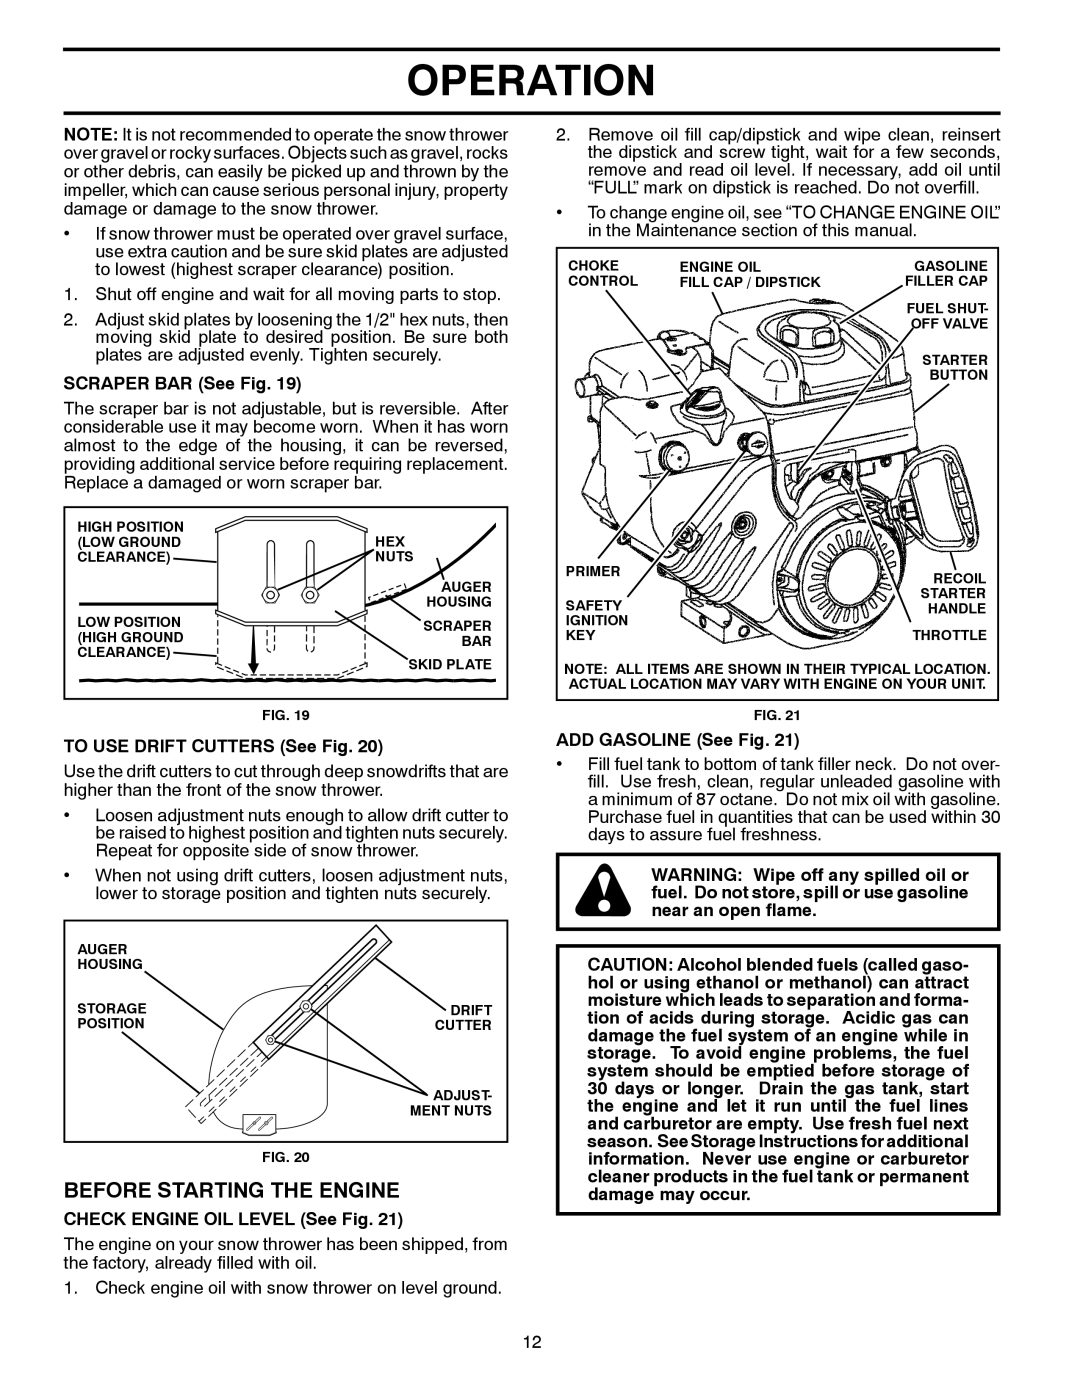 Husqvarna 14527SB-LS manual Before Starting The Engine, Operation, SCRAPER BAR See Fig, TO USE DRIFT CUTTERS See Fig 